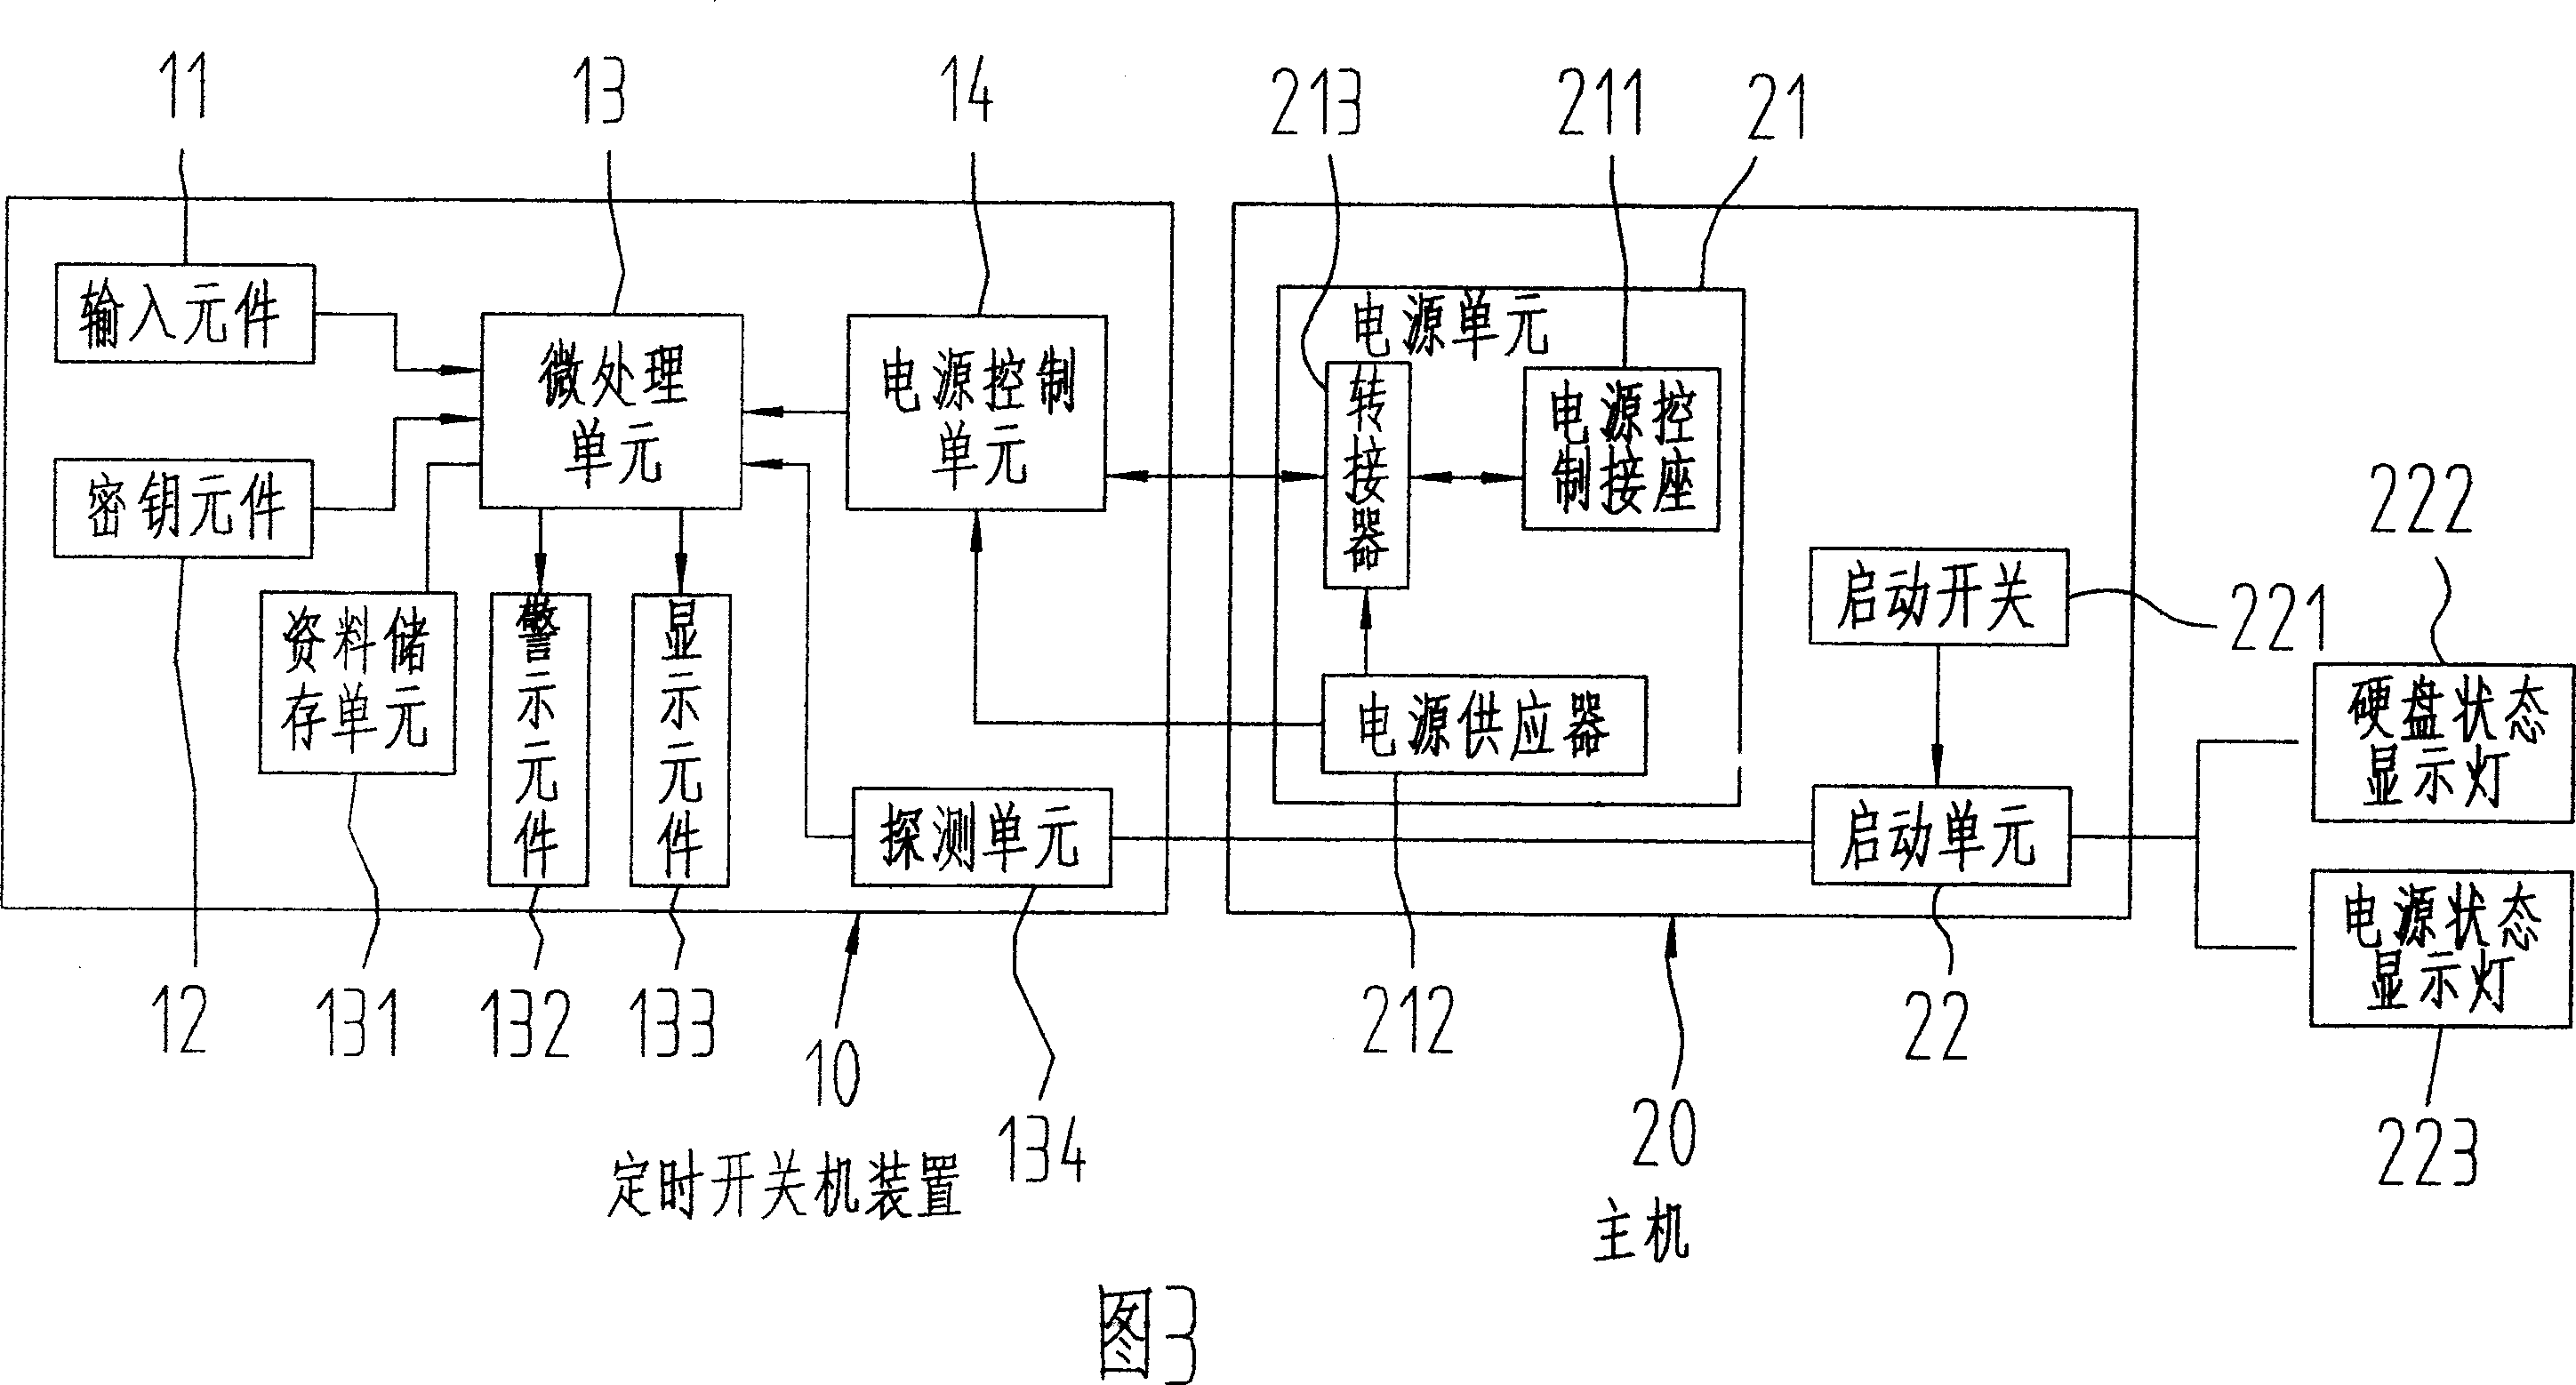 Timing turn-on turn-off device and the method